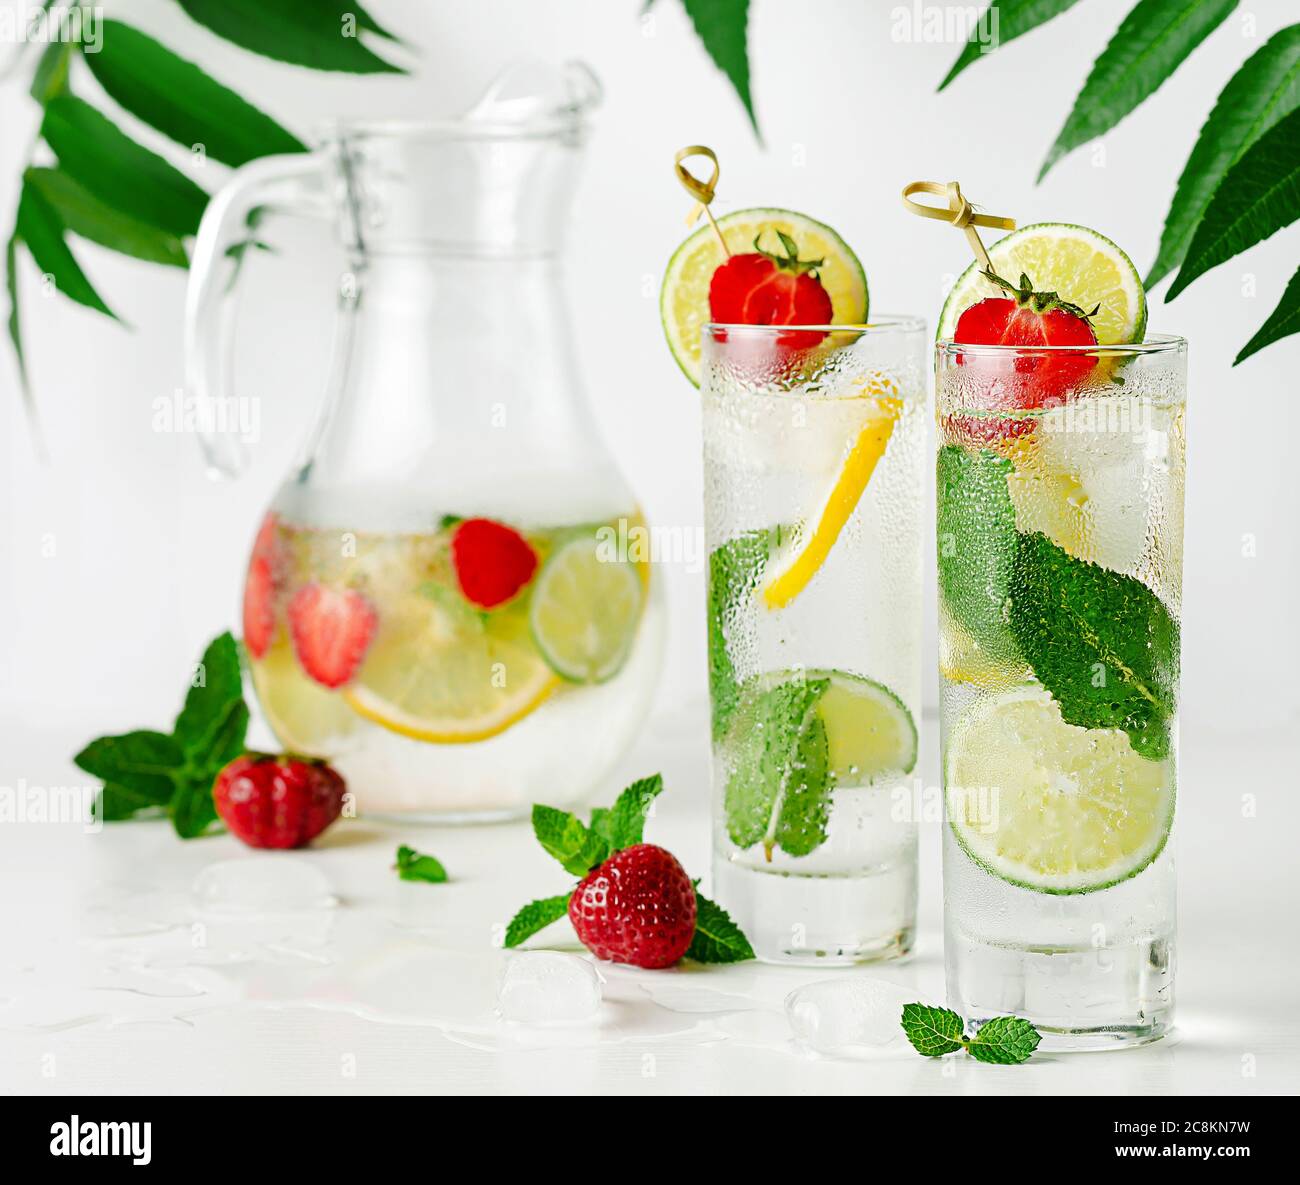 Refreshing infused water with lime, lemon, mint and strawberry on white background. Stock Photo